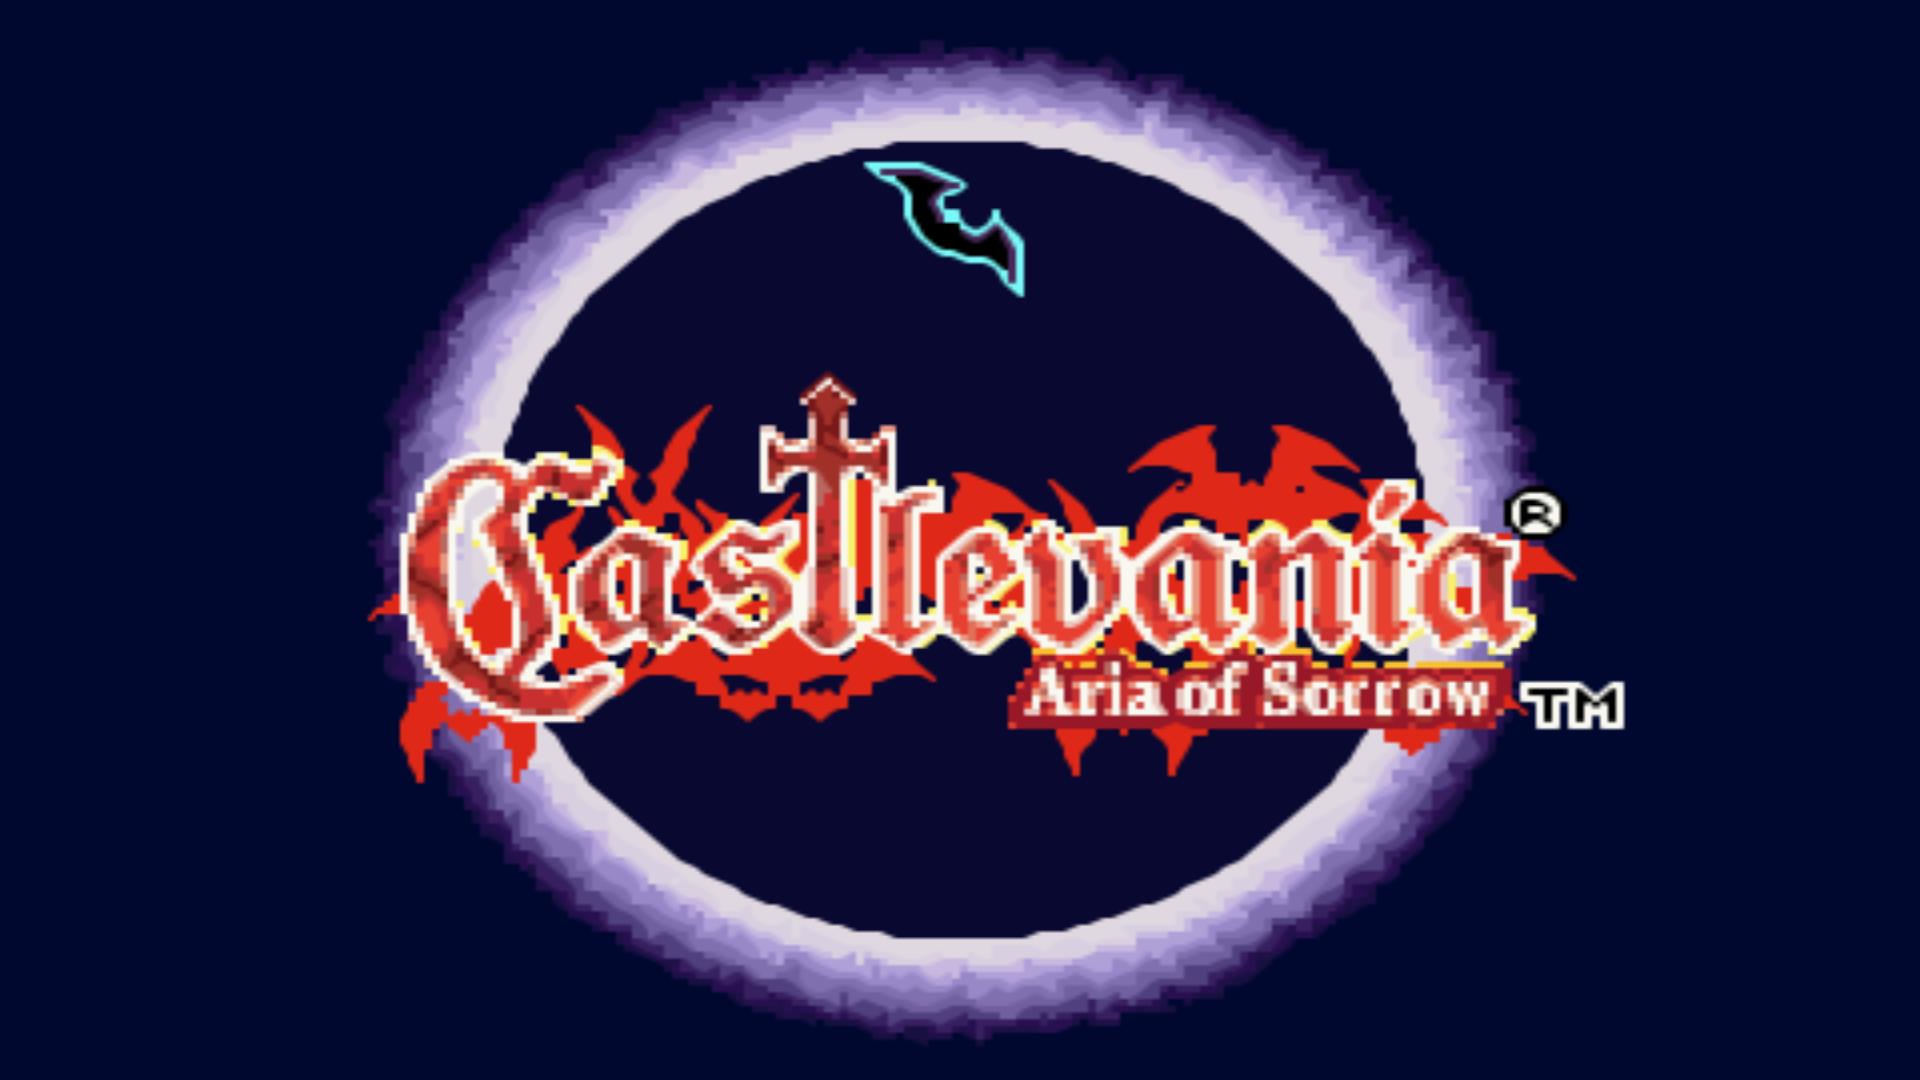 Video Game Castlevania: Aria Of Sorrow HD Wallpaper | Background Image